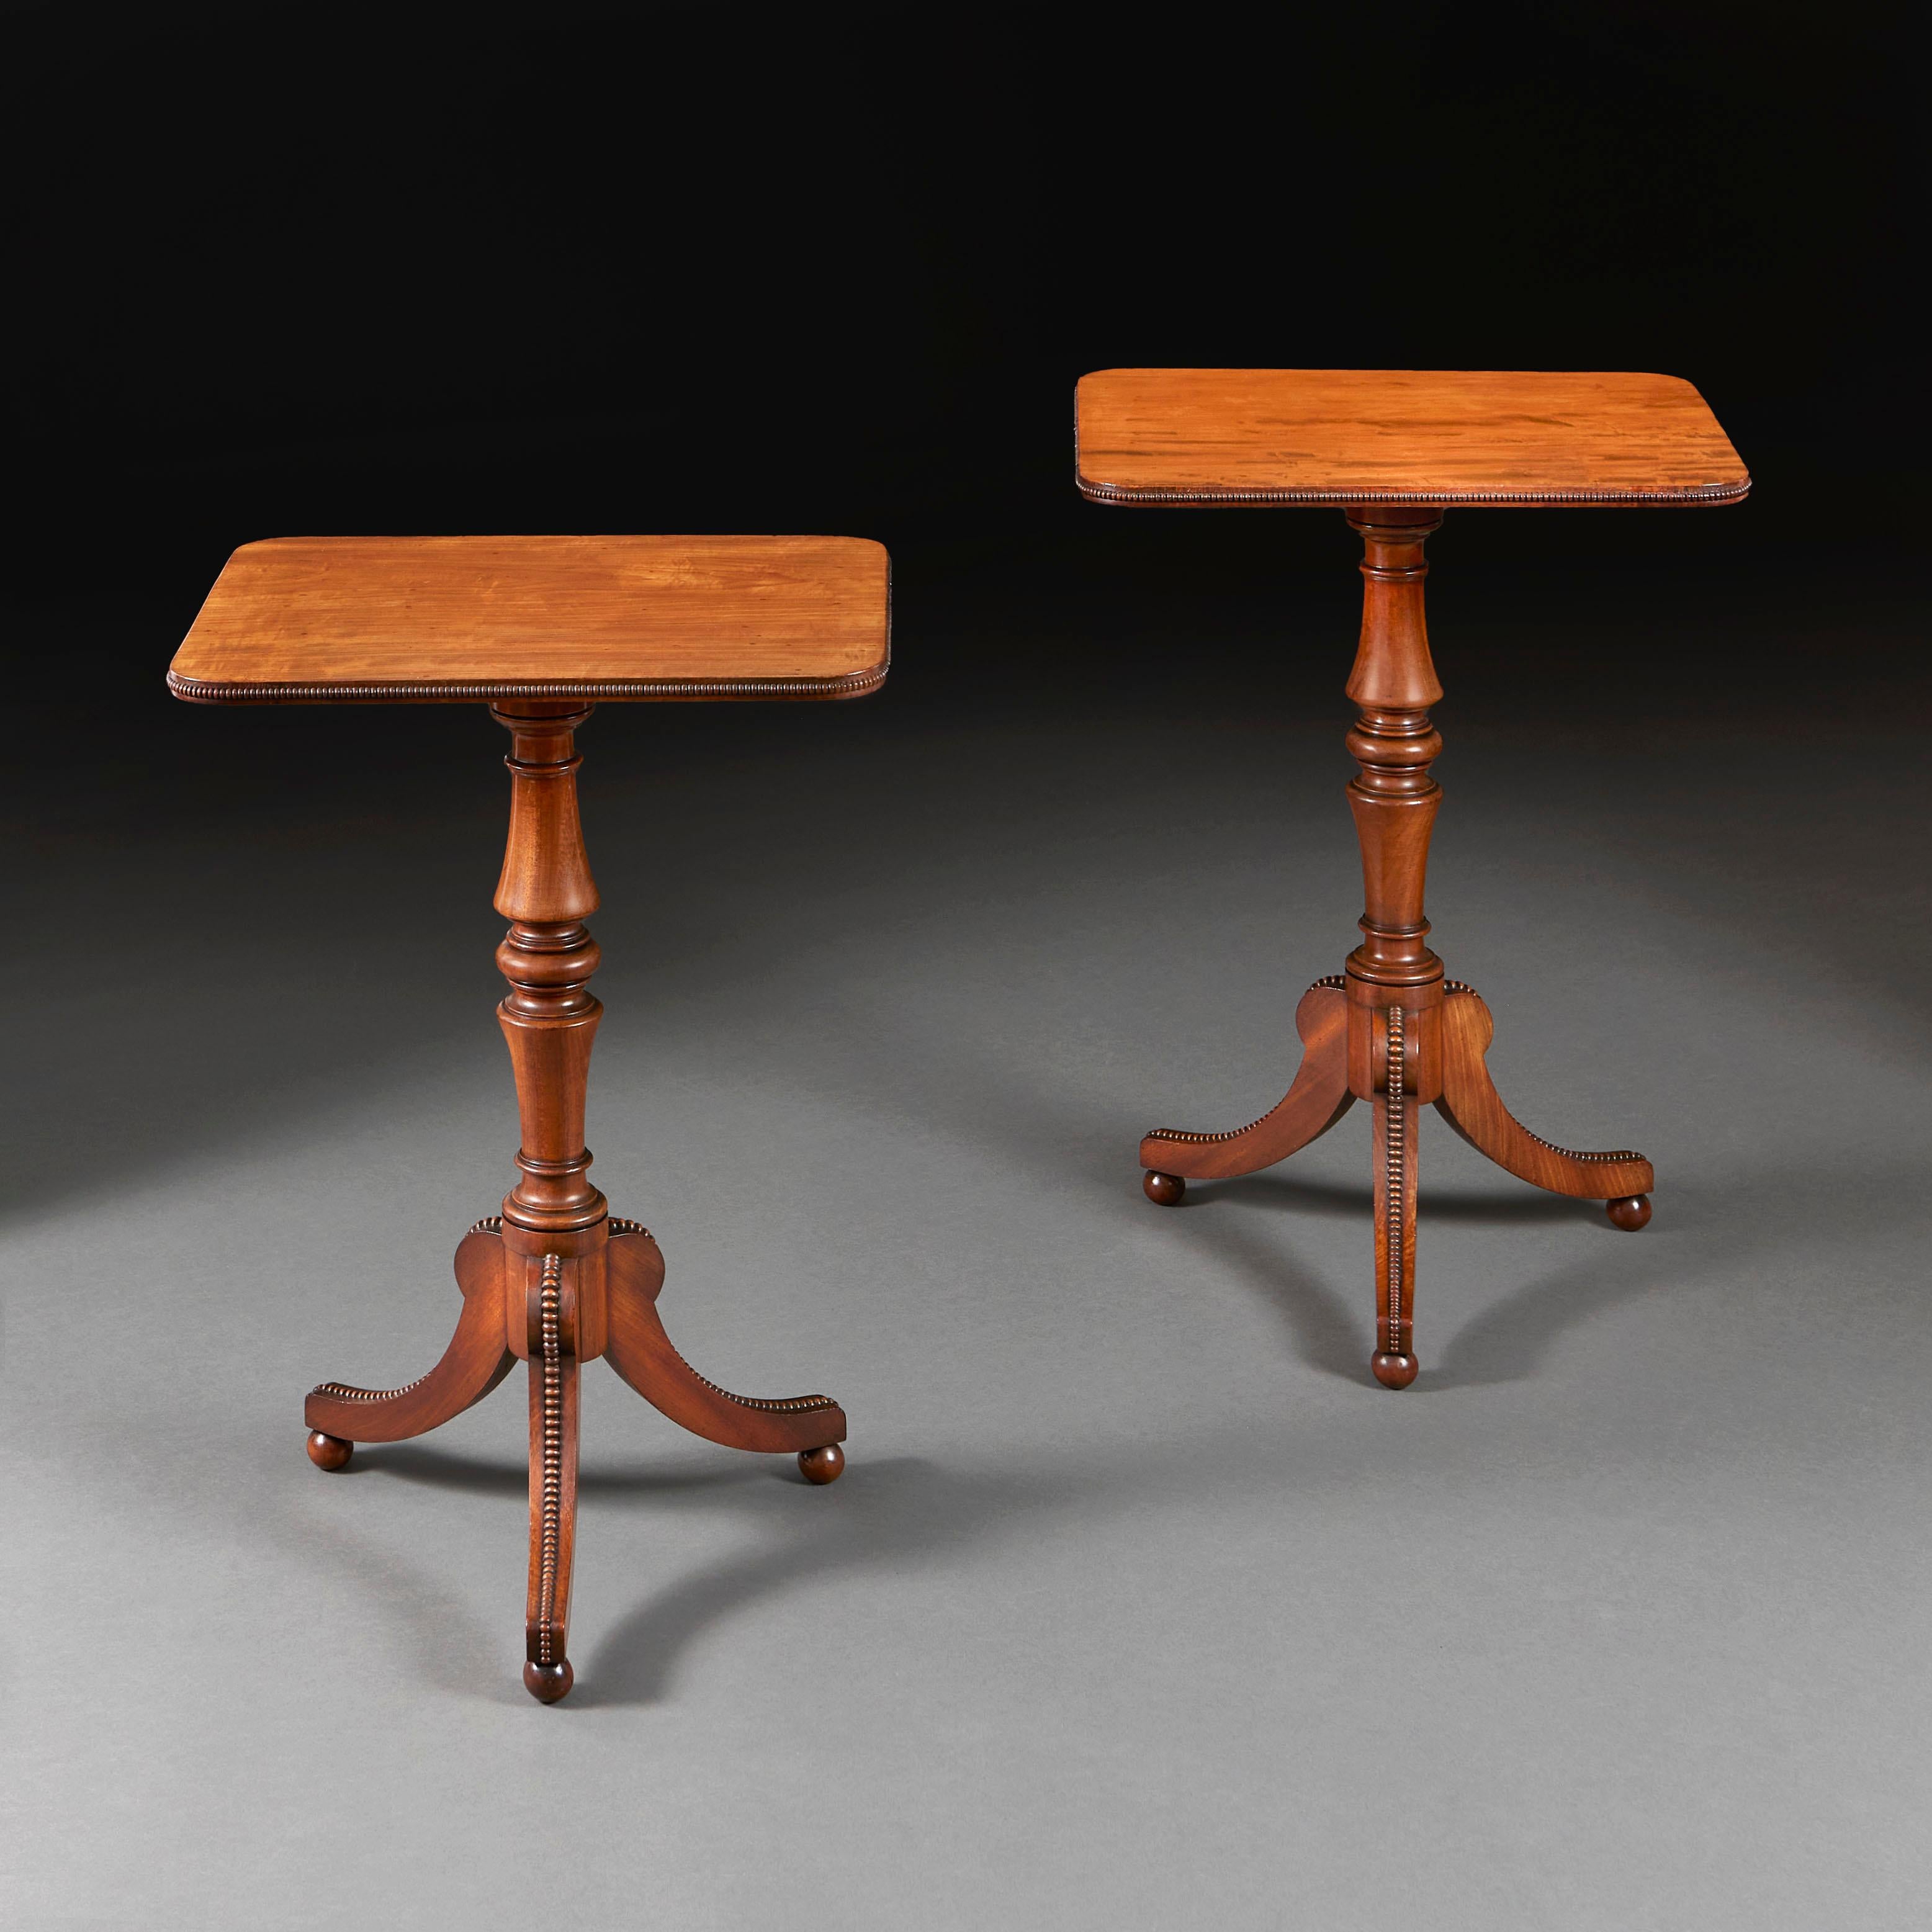 England, circa 1820

A fine pair of mahogany occasional tables, with finely figured rectangular tops, the edges with cock beading, turned gun barrel pedestal, supported on tripod splayed feet, also decorated with cock beading. Attributed to Gillows